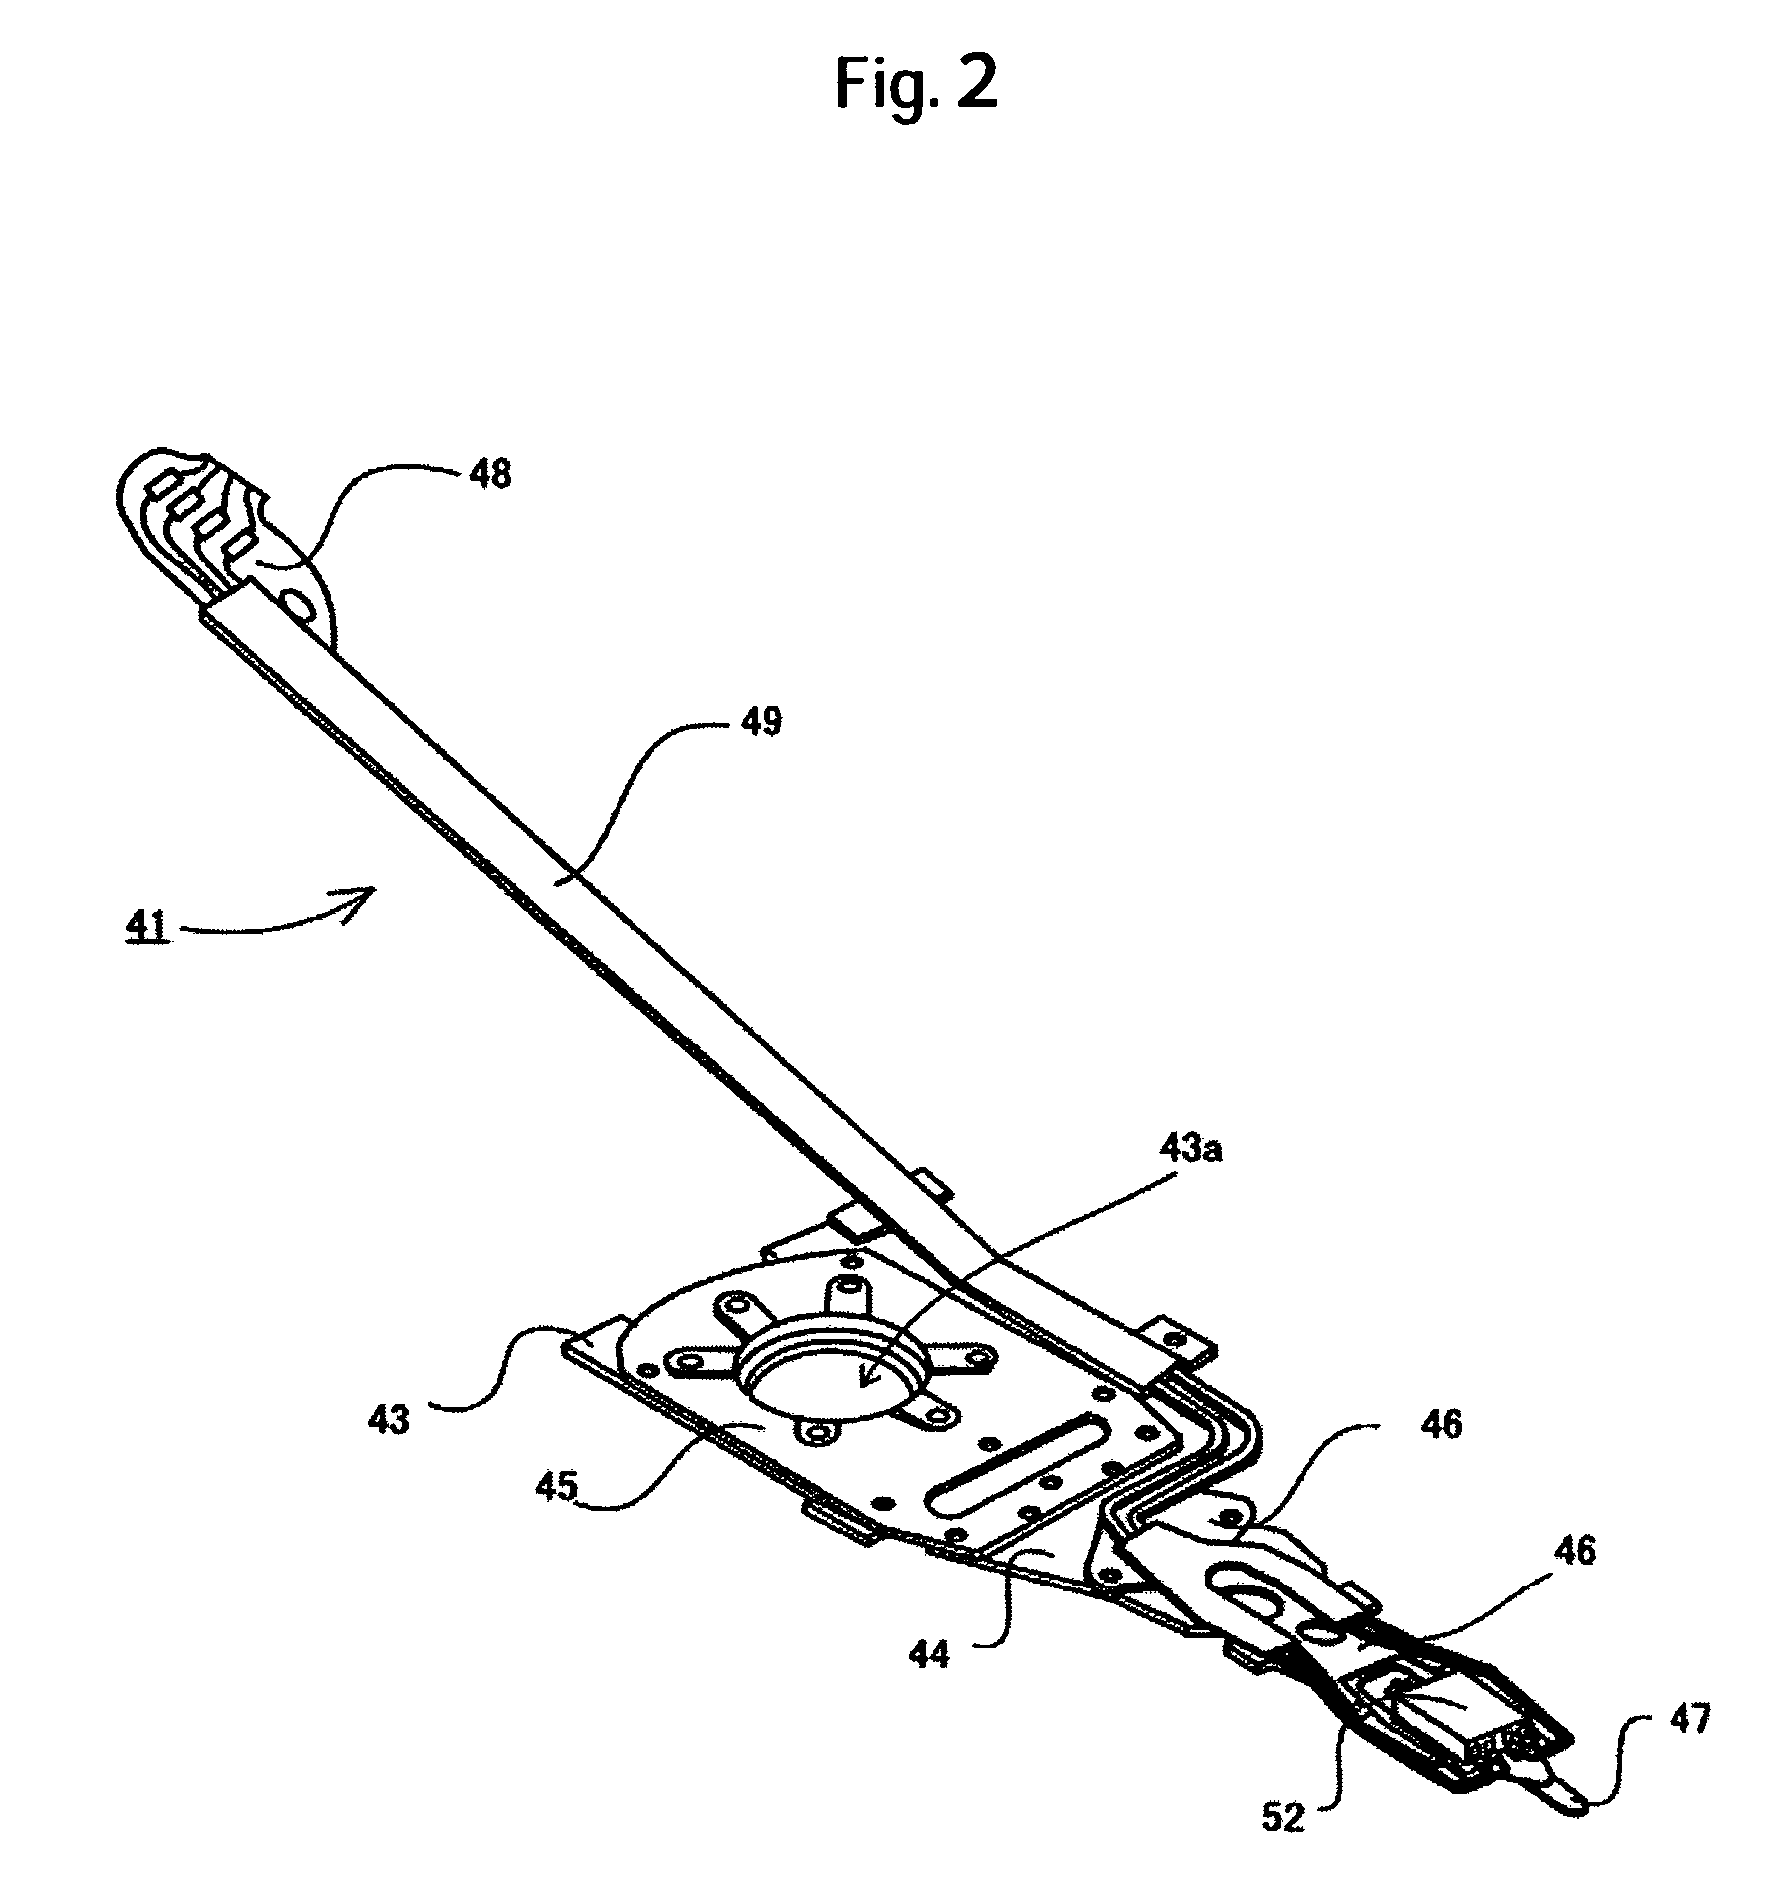 Head gimbal assembly method with solder fillet formed by laser irradiating a shaped solder mass